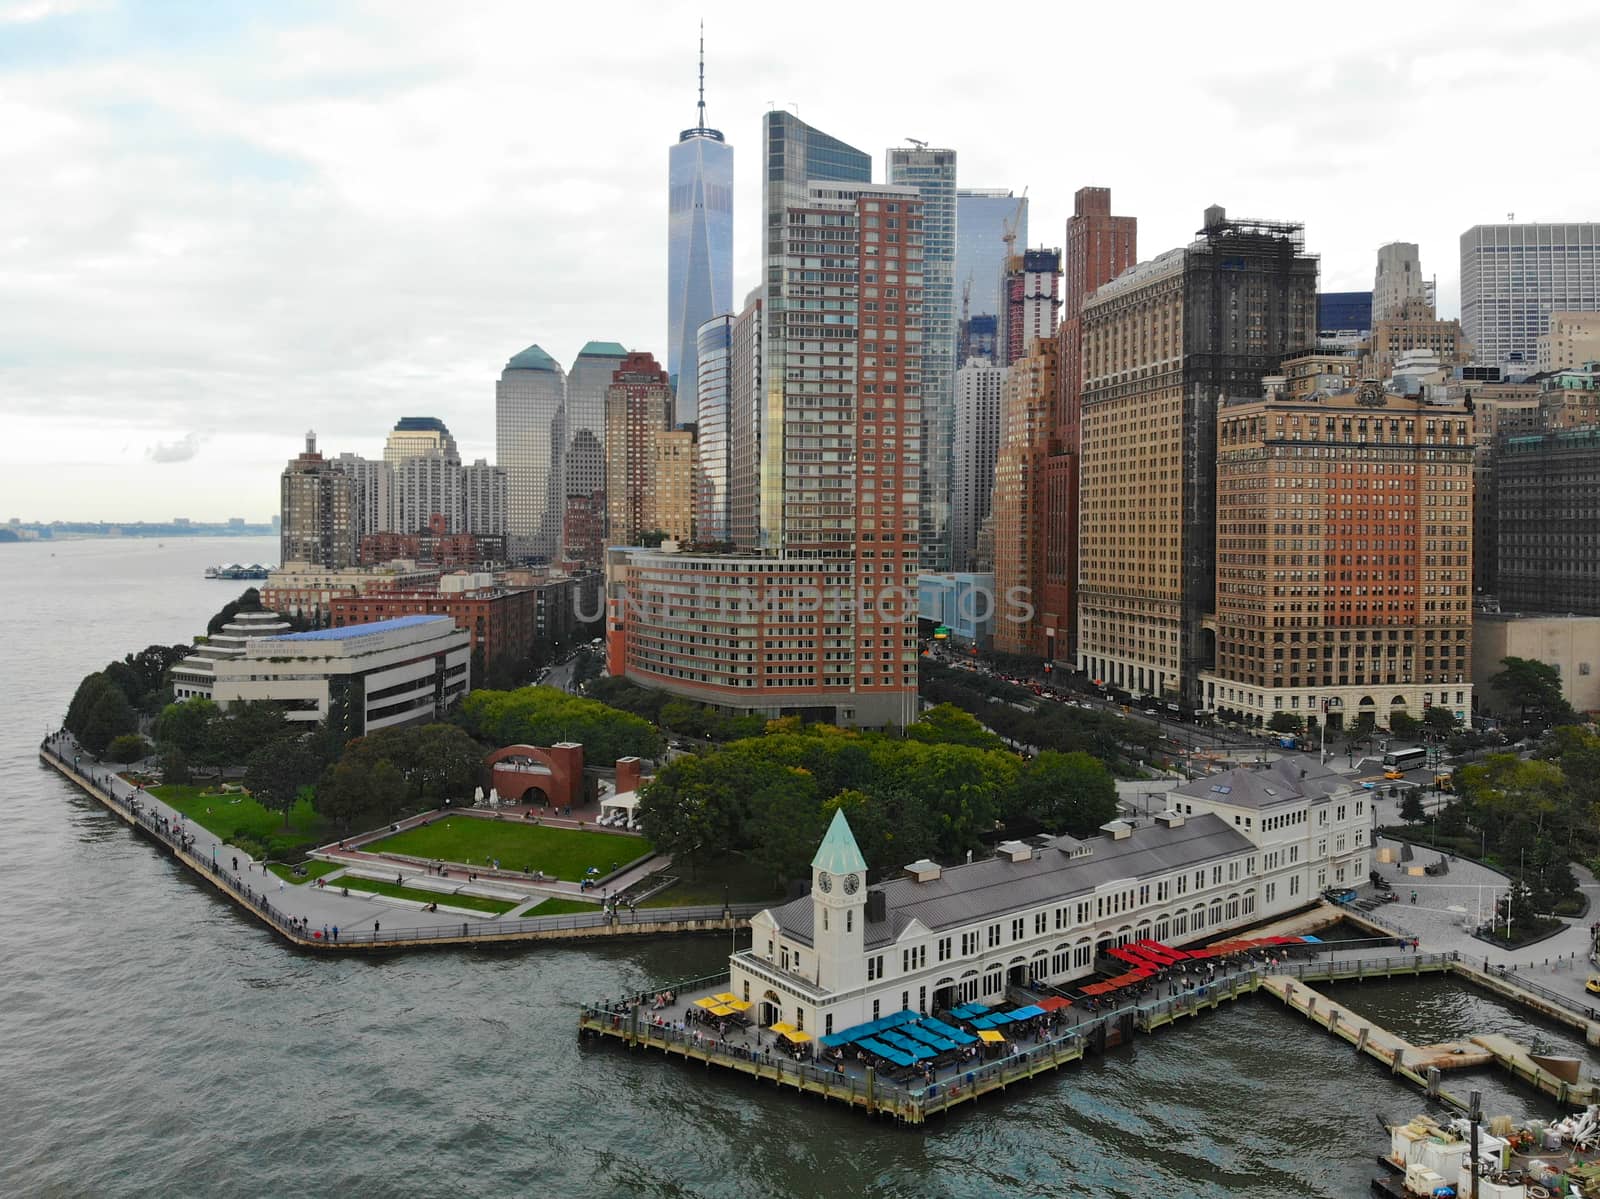 Aerial view of Battery Park pier A leading to Liberty Island, people can be seen waiting in line for boarding as well as looking at Liberty Island located opposite to the docks. October, 22nd, 2019